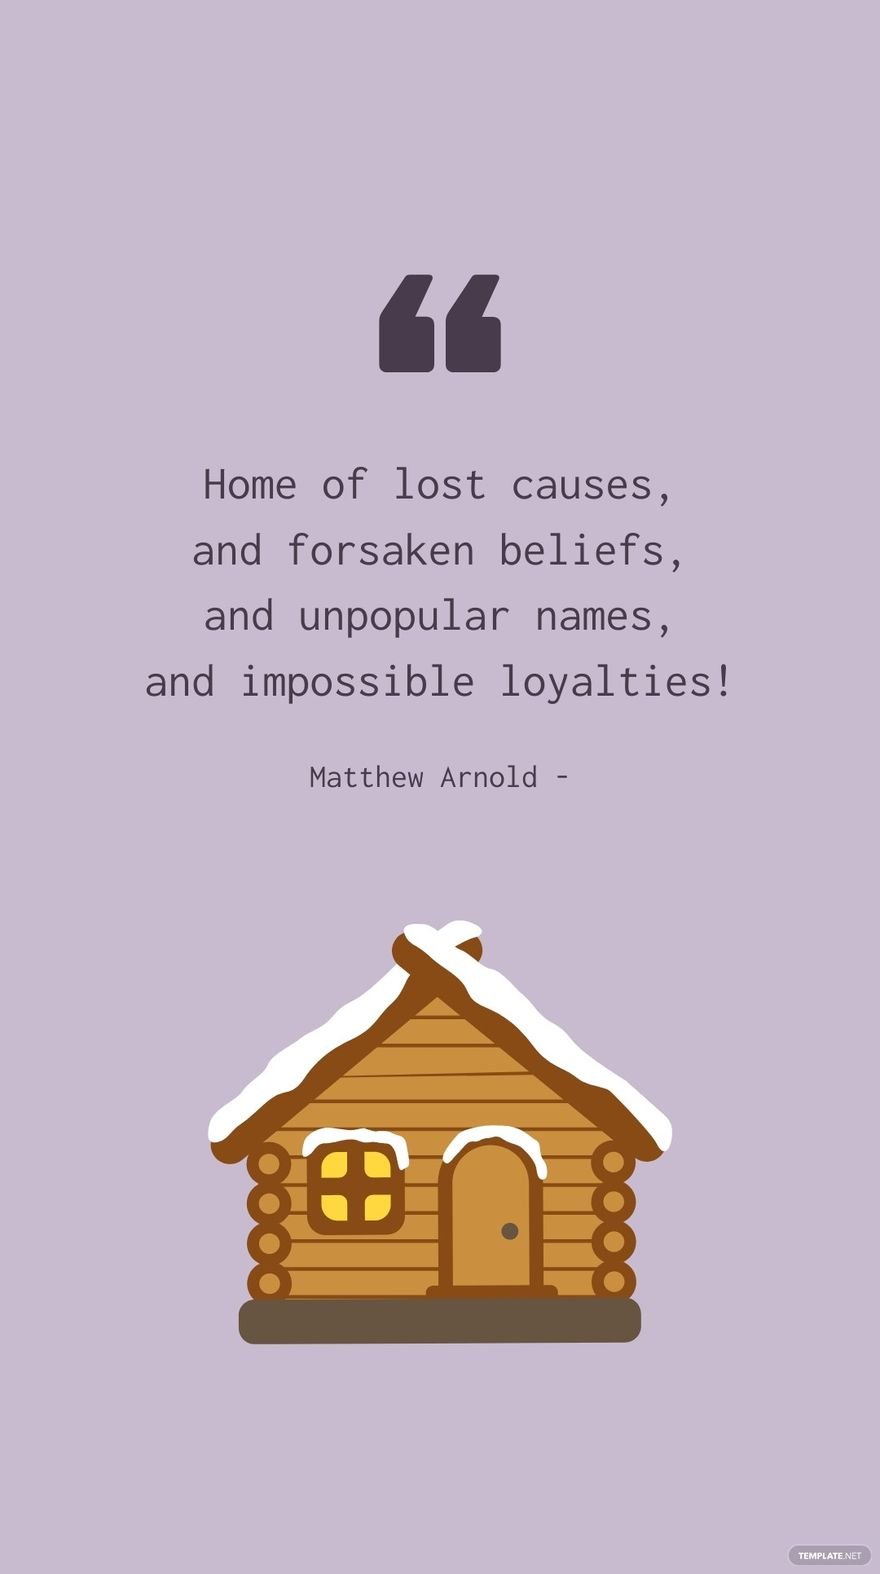 Matthew Arnold - Home of lost causes, and forsaken beliefs, and unpopular names, and impossible loyalties! in JPG